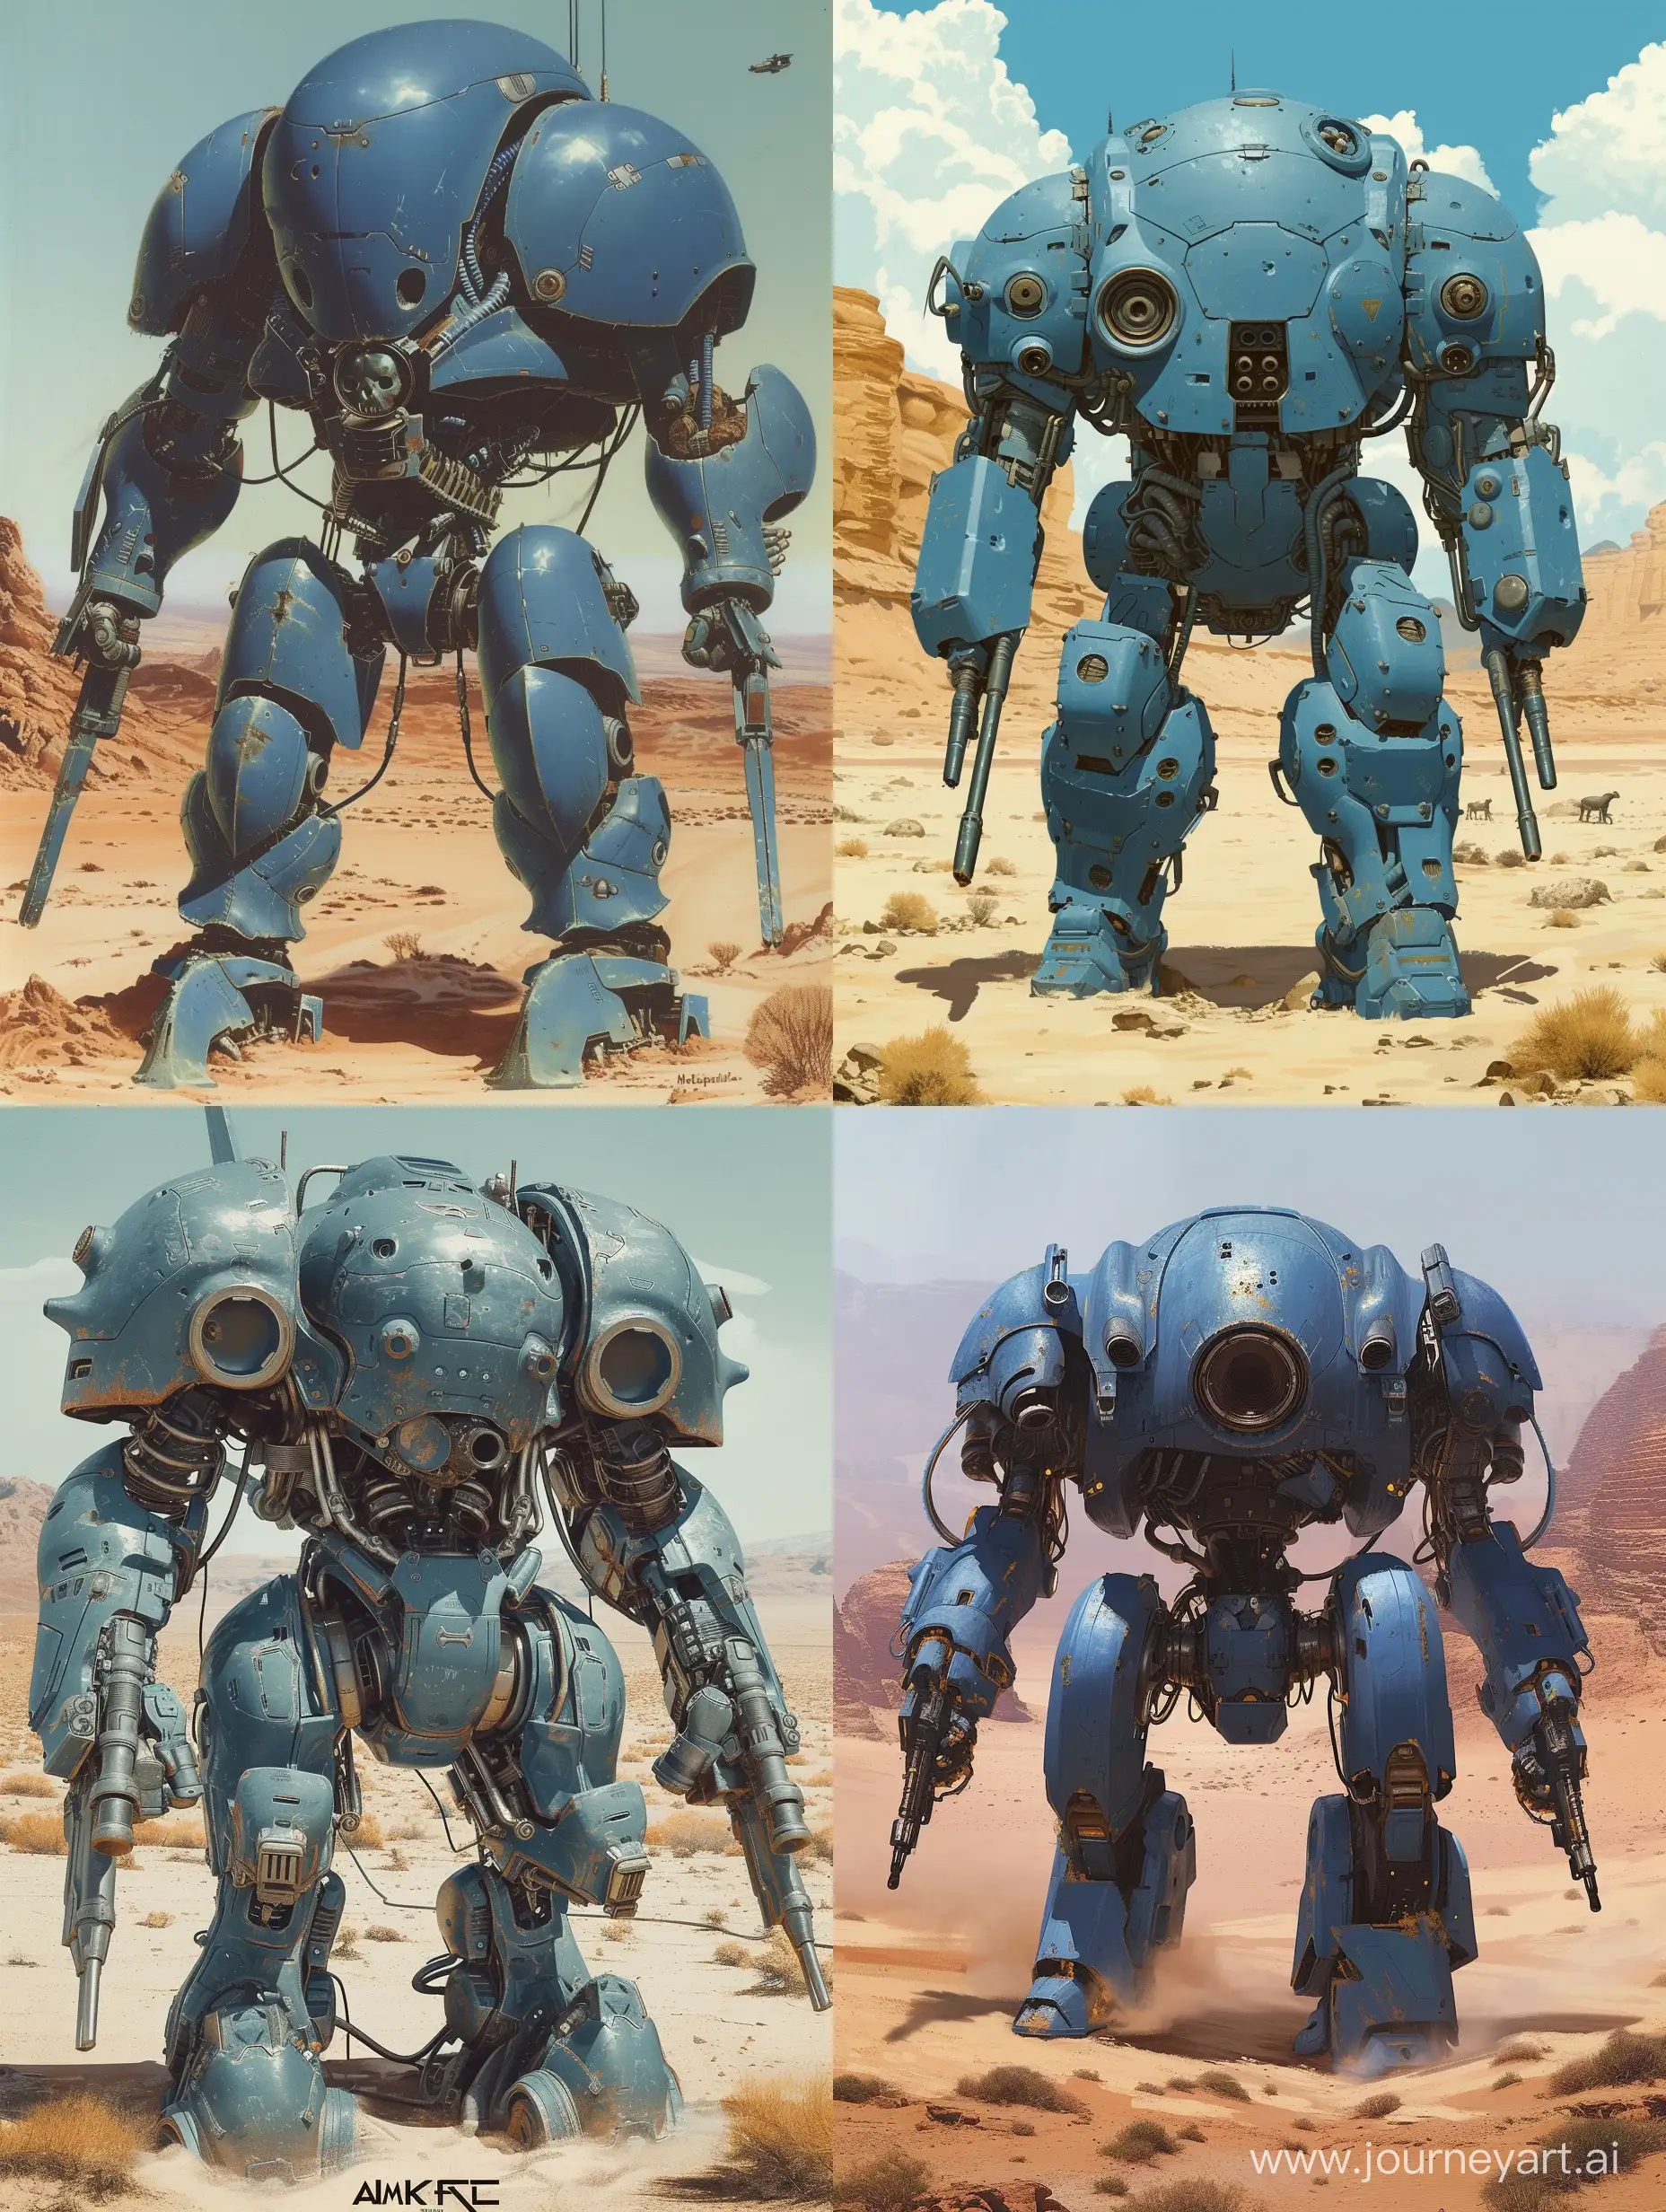 Retro-Science-Fiction-Art-Blue-Mech-Suit-with-Central-Cockpit-and-Weapon-Arms-in-Desert